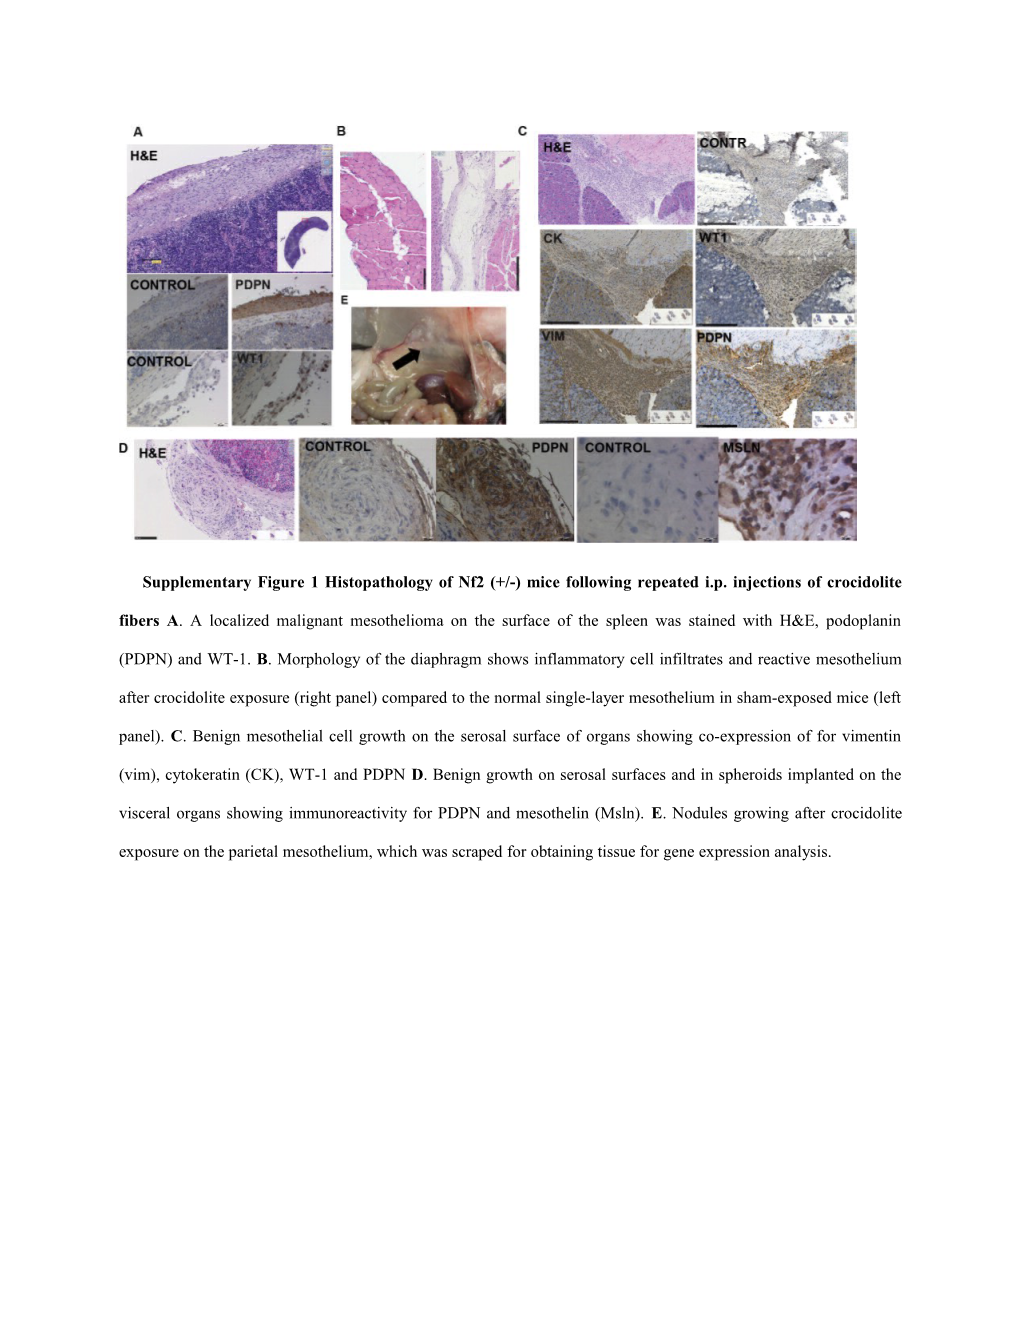 Supplementary Figure 1 Histopathology of Nf2 (+/-) Mice Following Repeated I.P. Injections